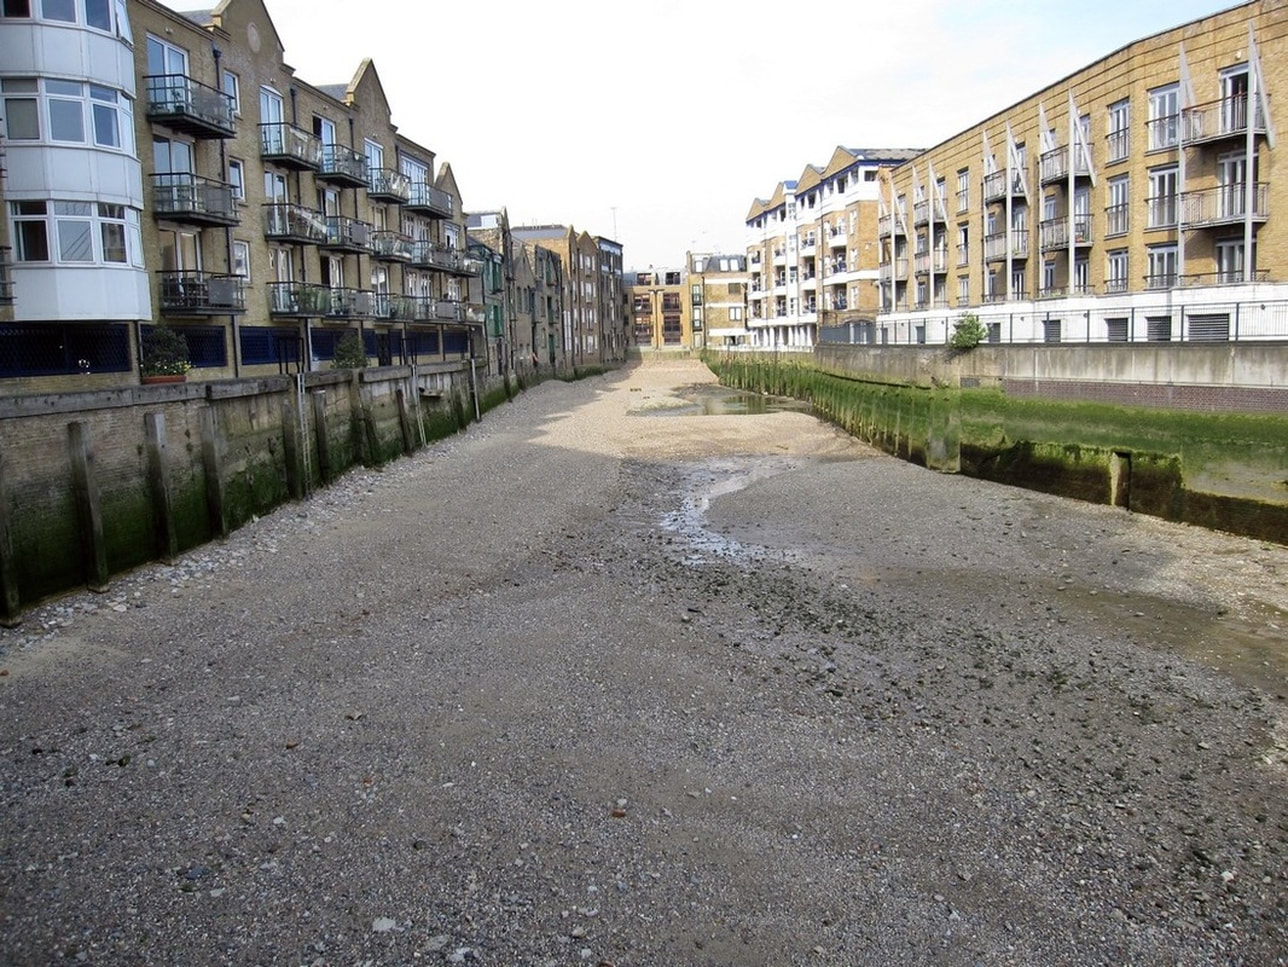 Picture of Limekiln Dock the mouth of the Black Ditch in Limehouse